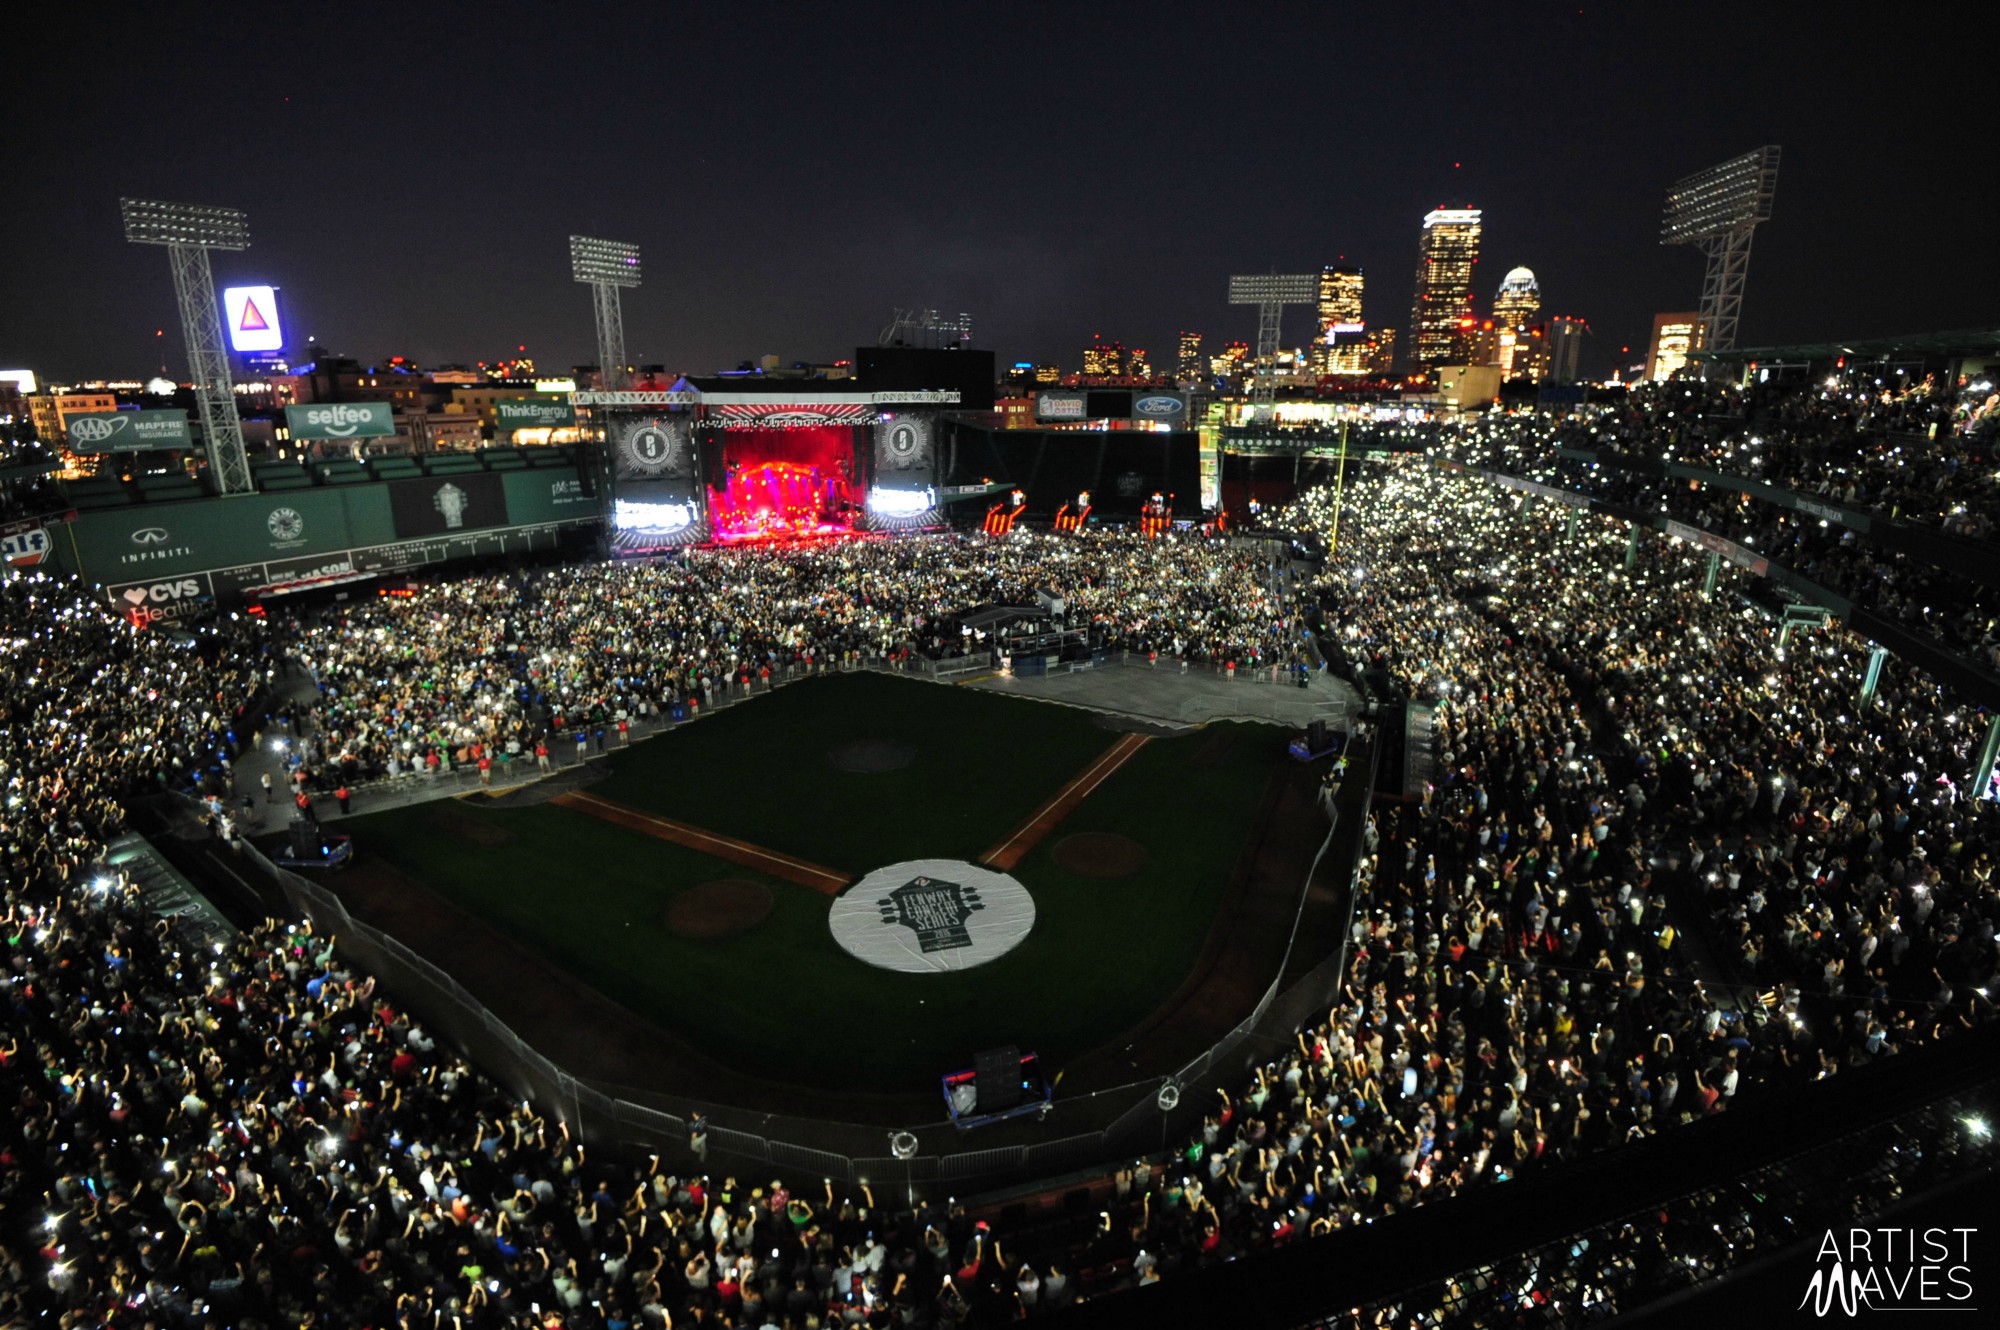 How MLB Ballparks Turn Into Magical Concert Venues - Artist Waves